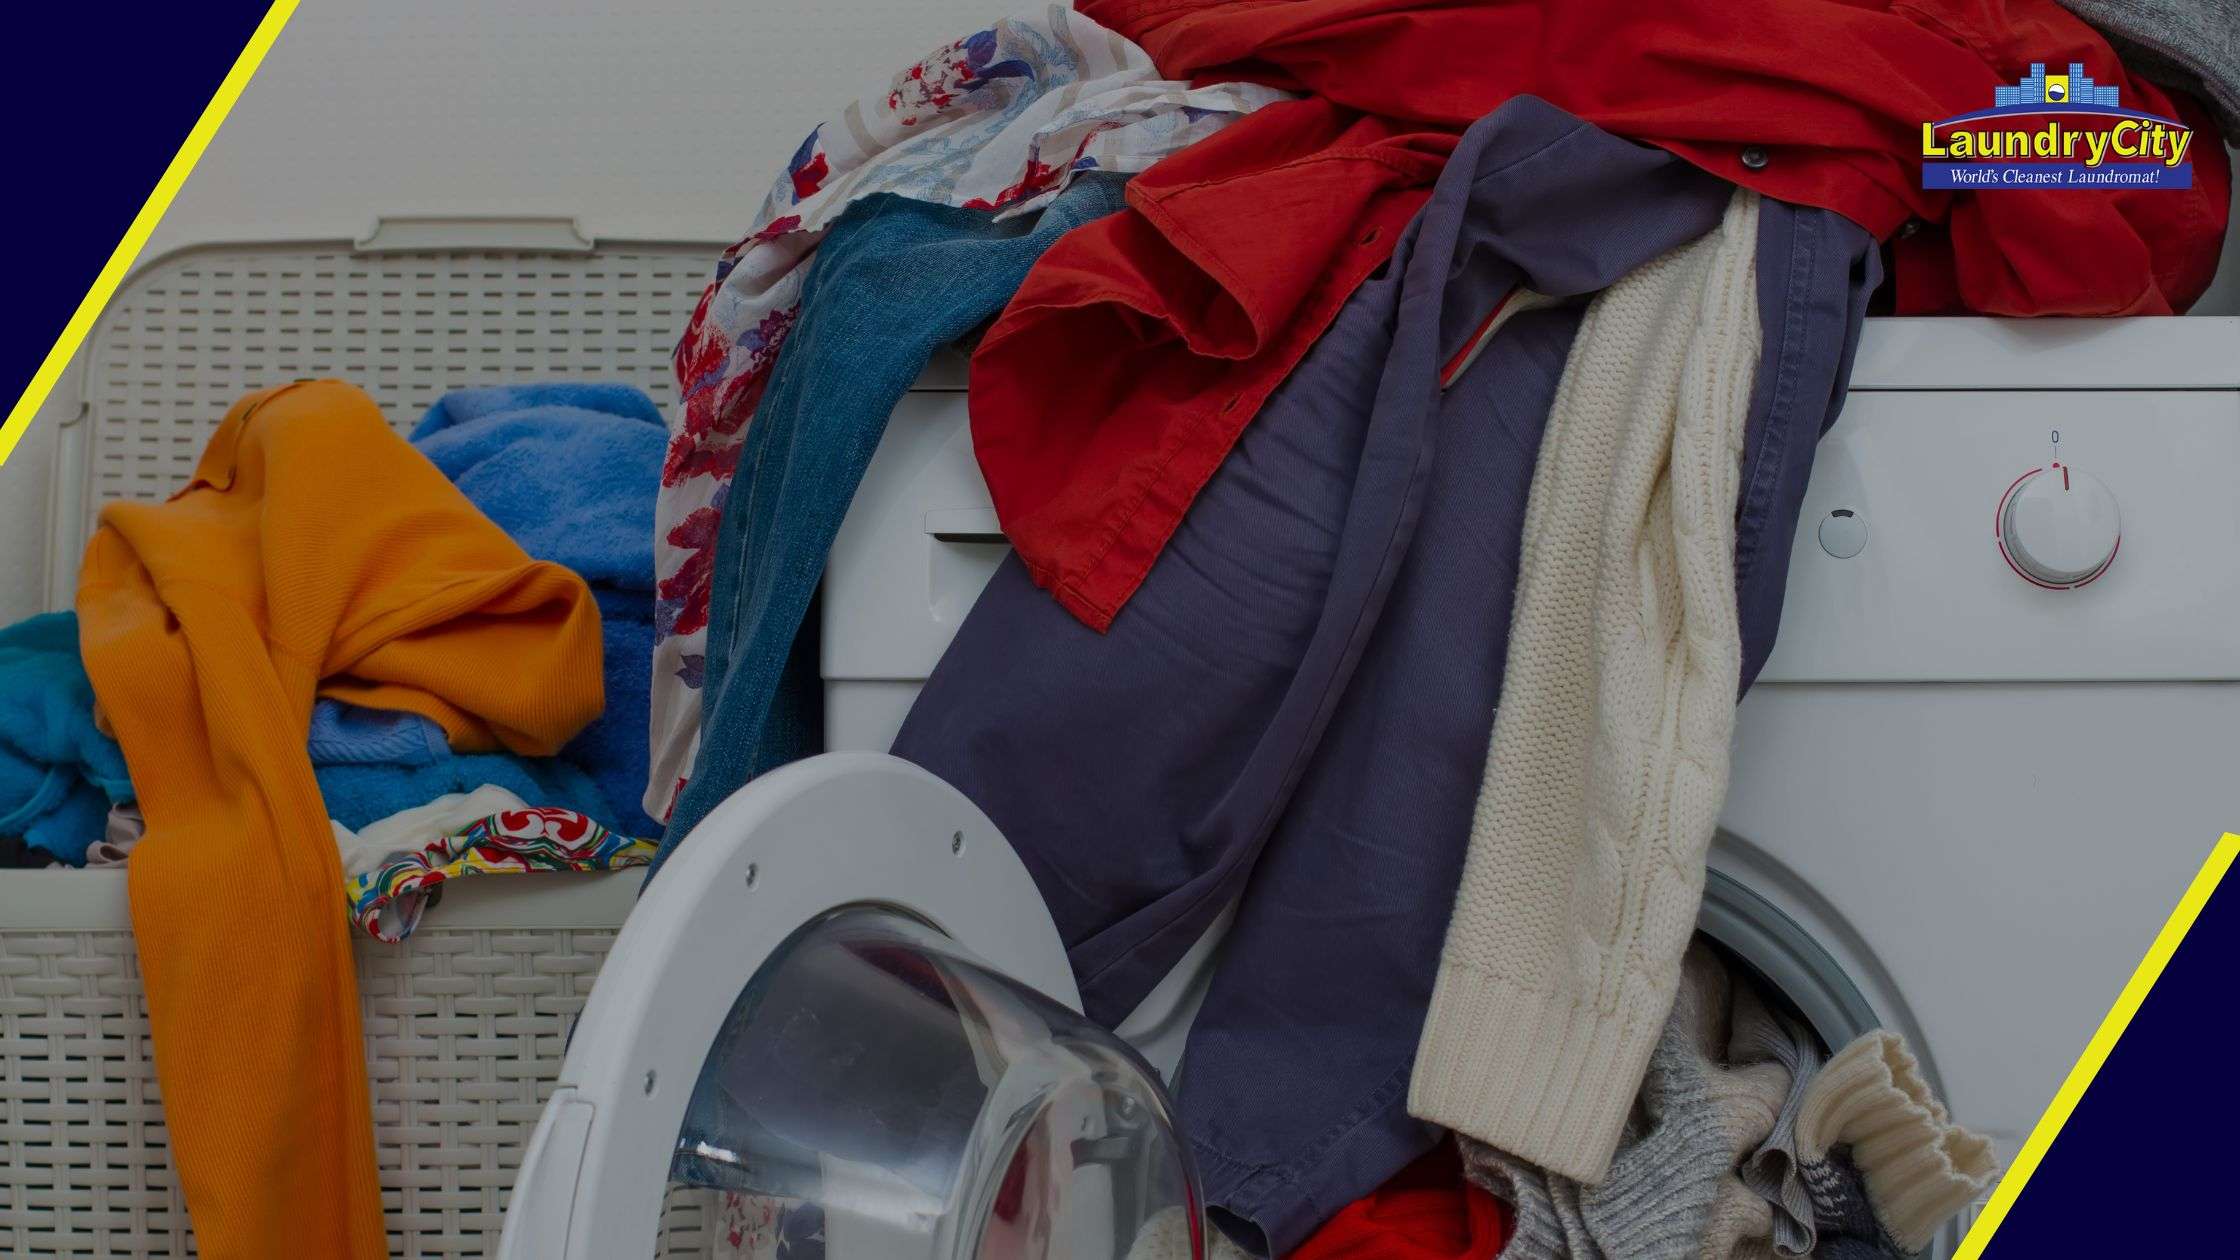 5 Common Laundry Problems and How to Fix Them